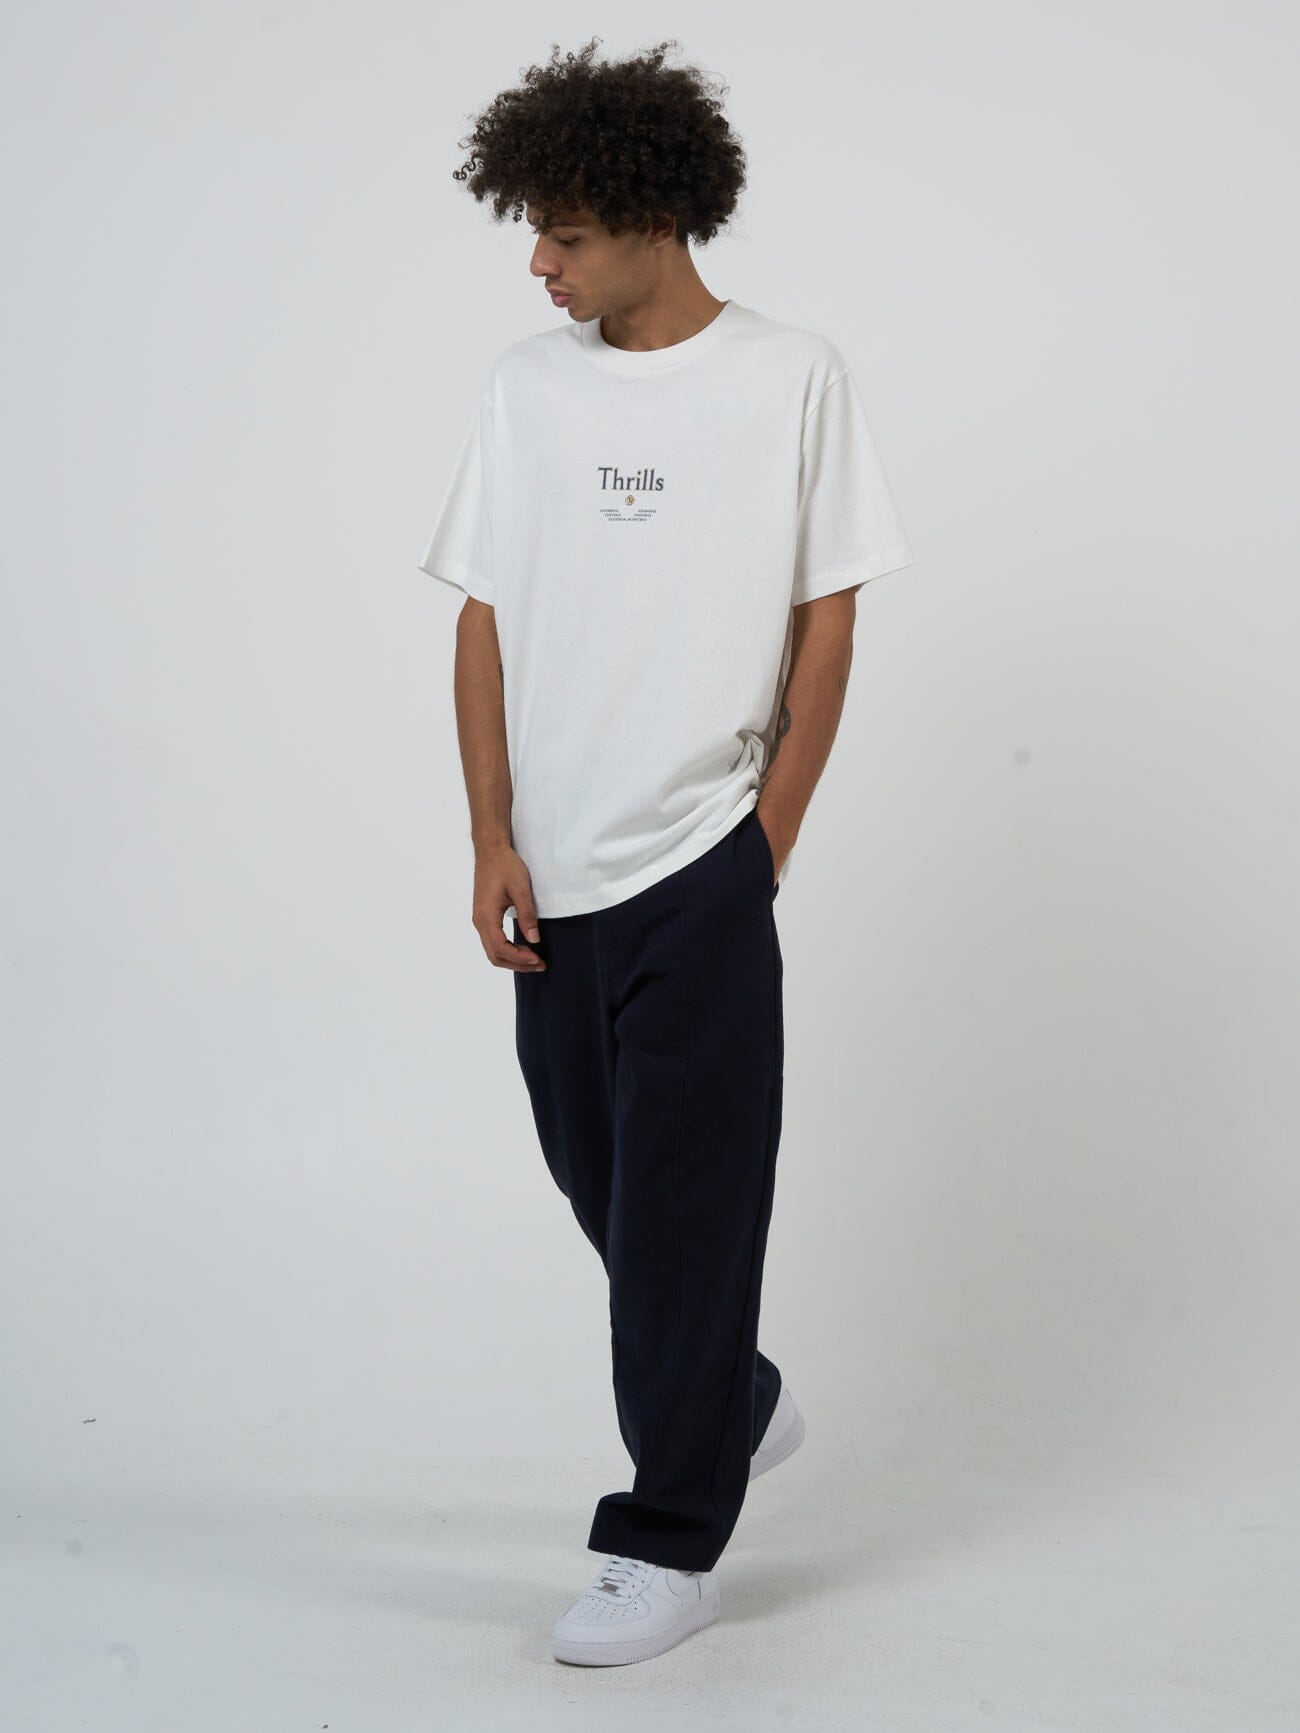 Existencial Country Club Merch Fit Tee - Dirty White